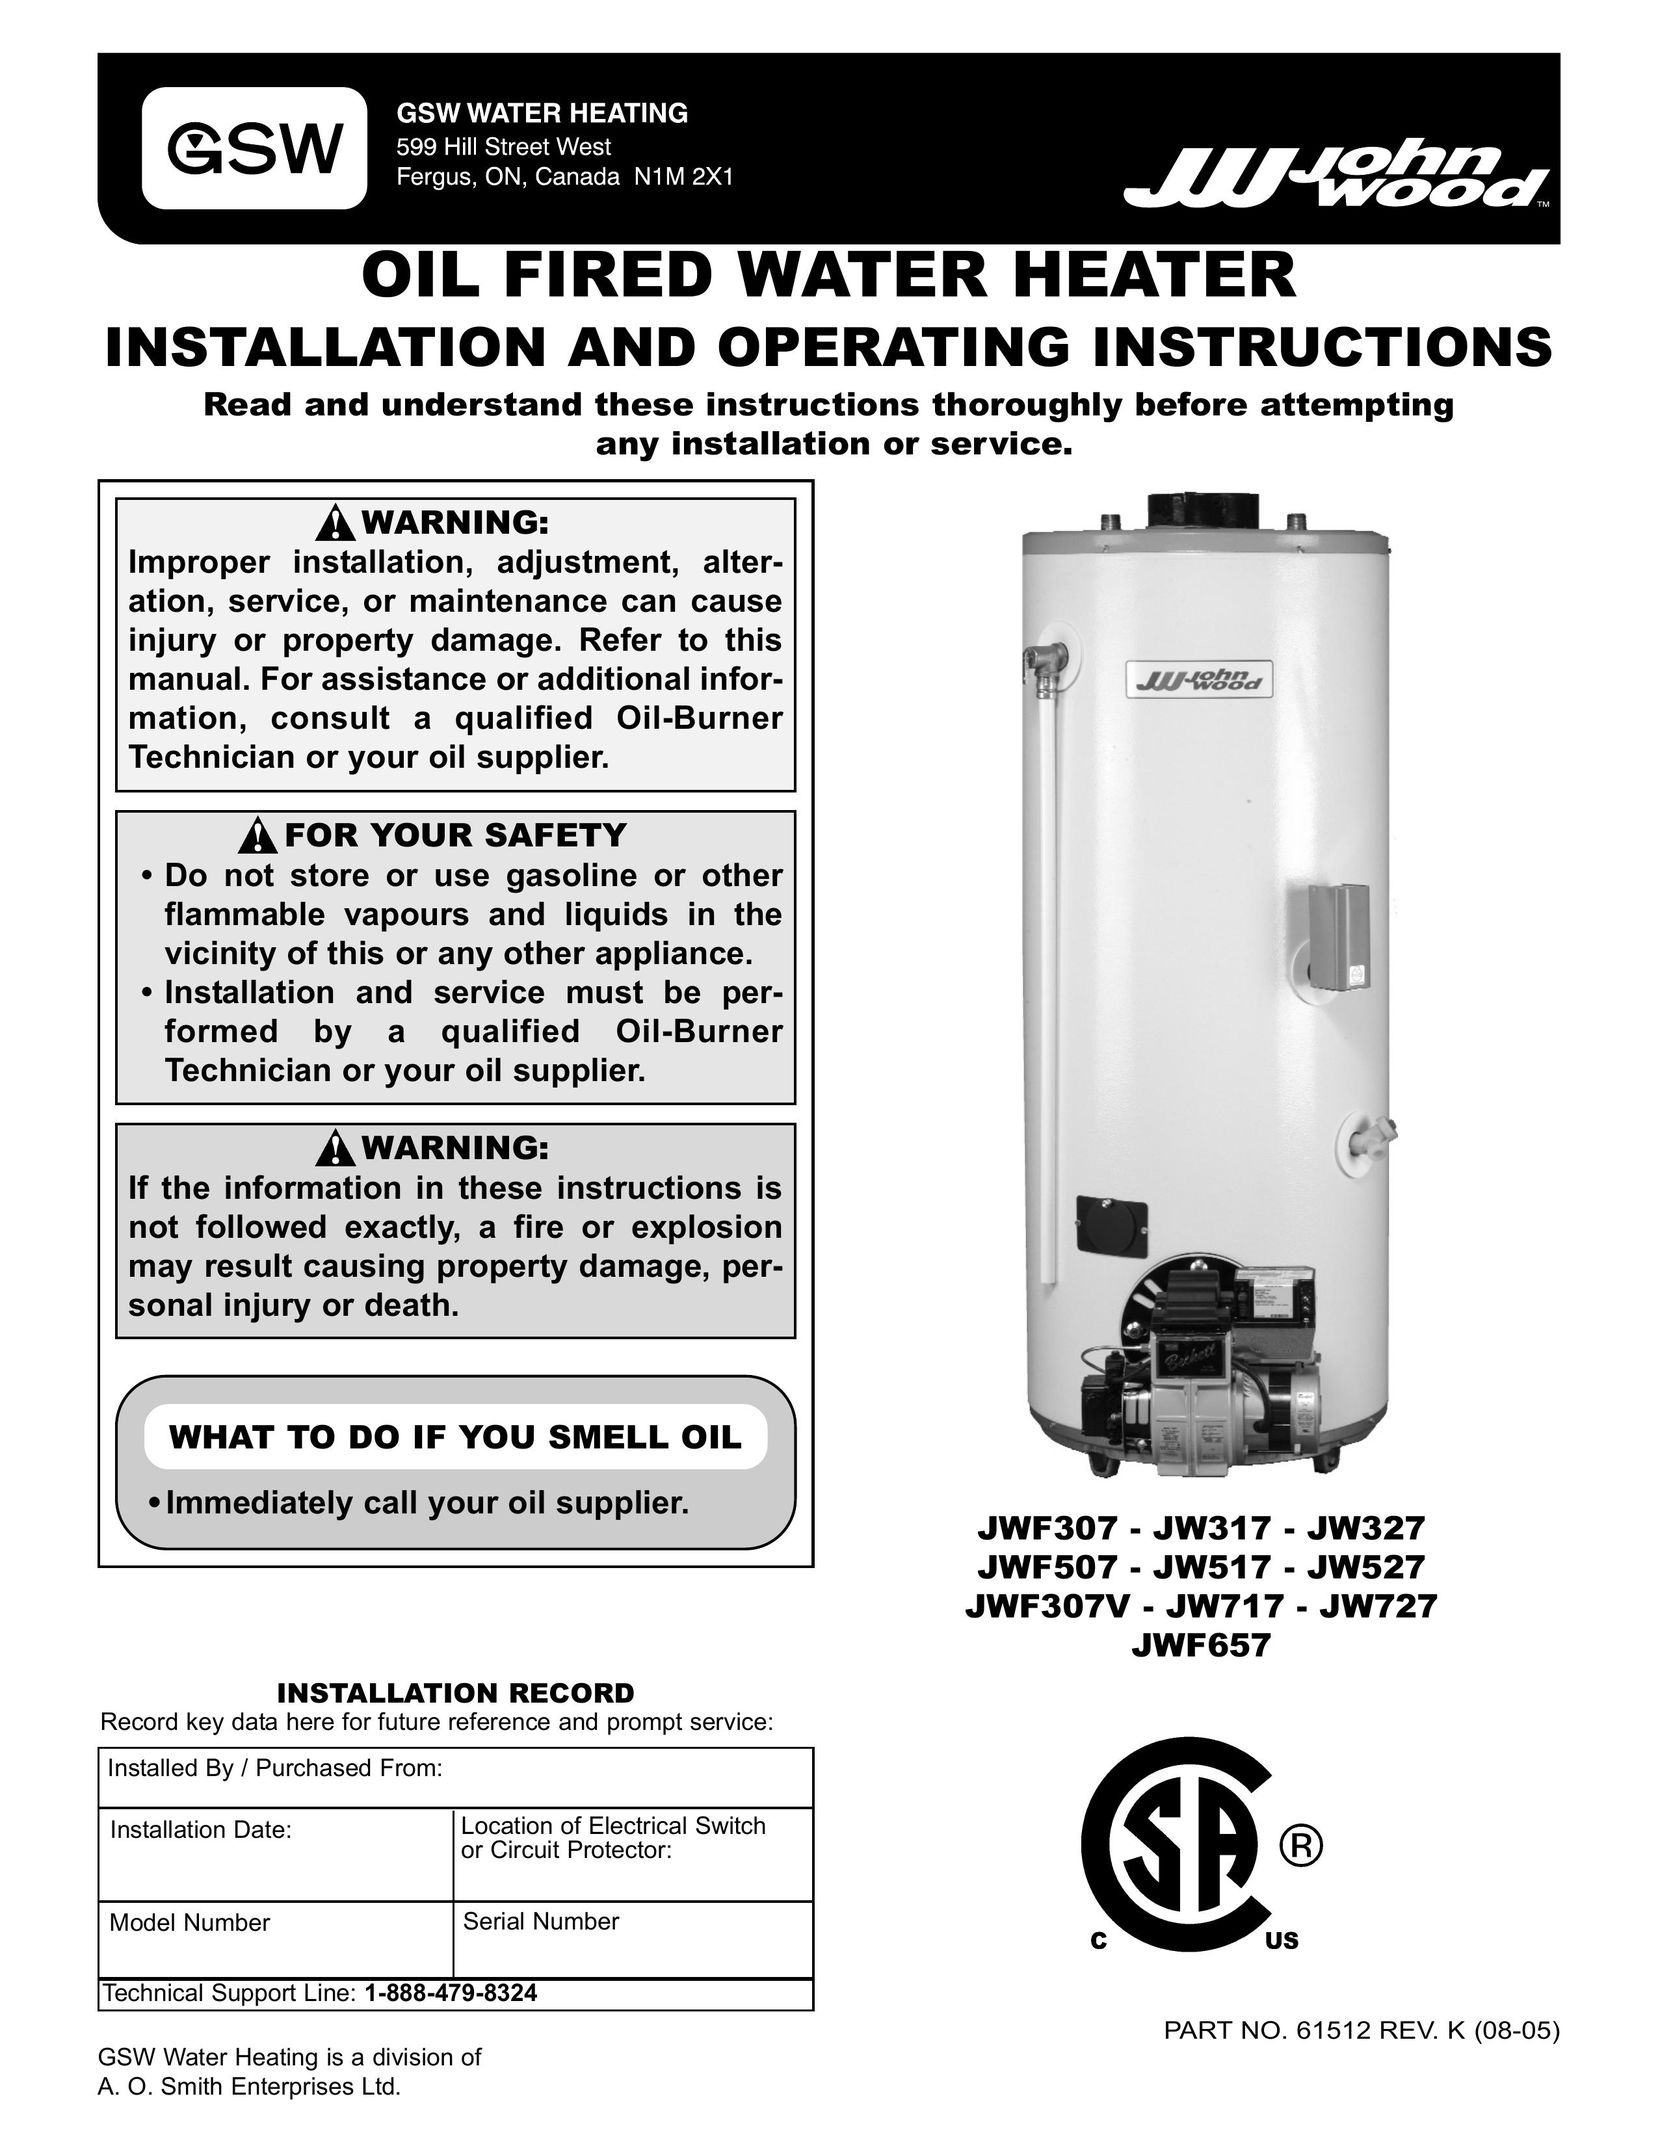 Smith Cast Iron Boilers JW727 Water Heater User Manual